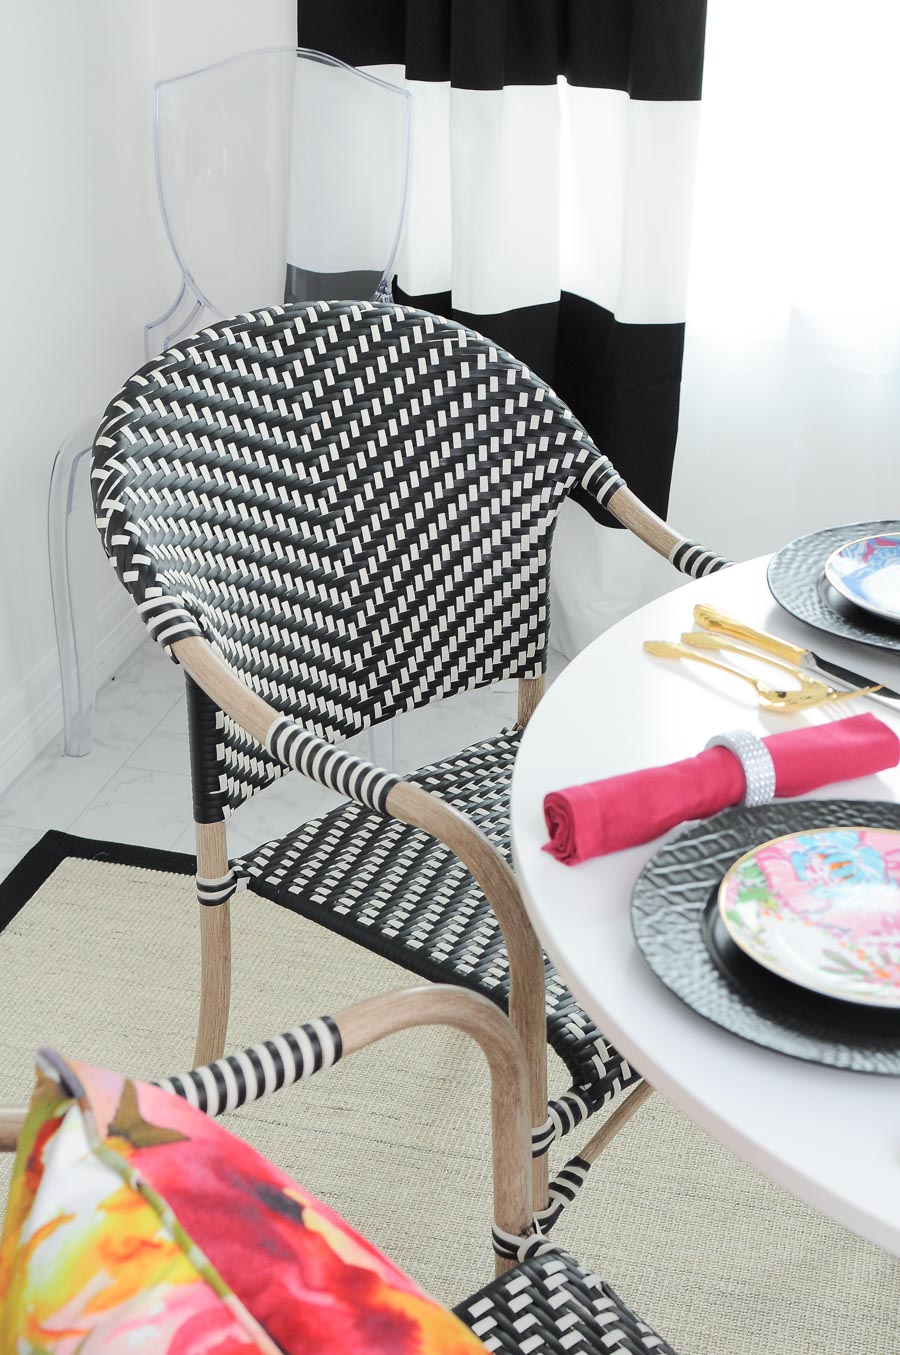 These $44 Parisian Dining Room Chairs look amazing in this small dining space decorated in bold black and white.